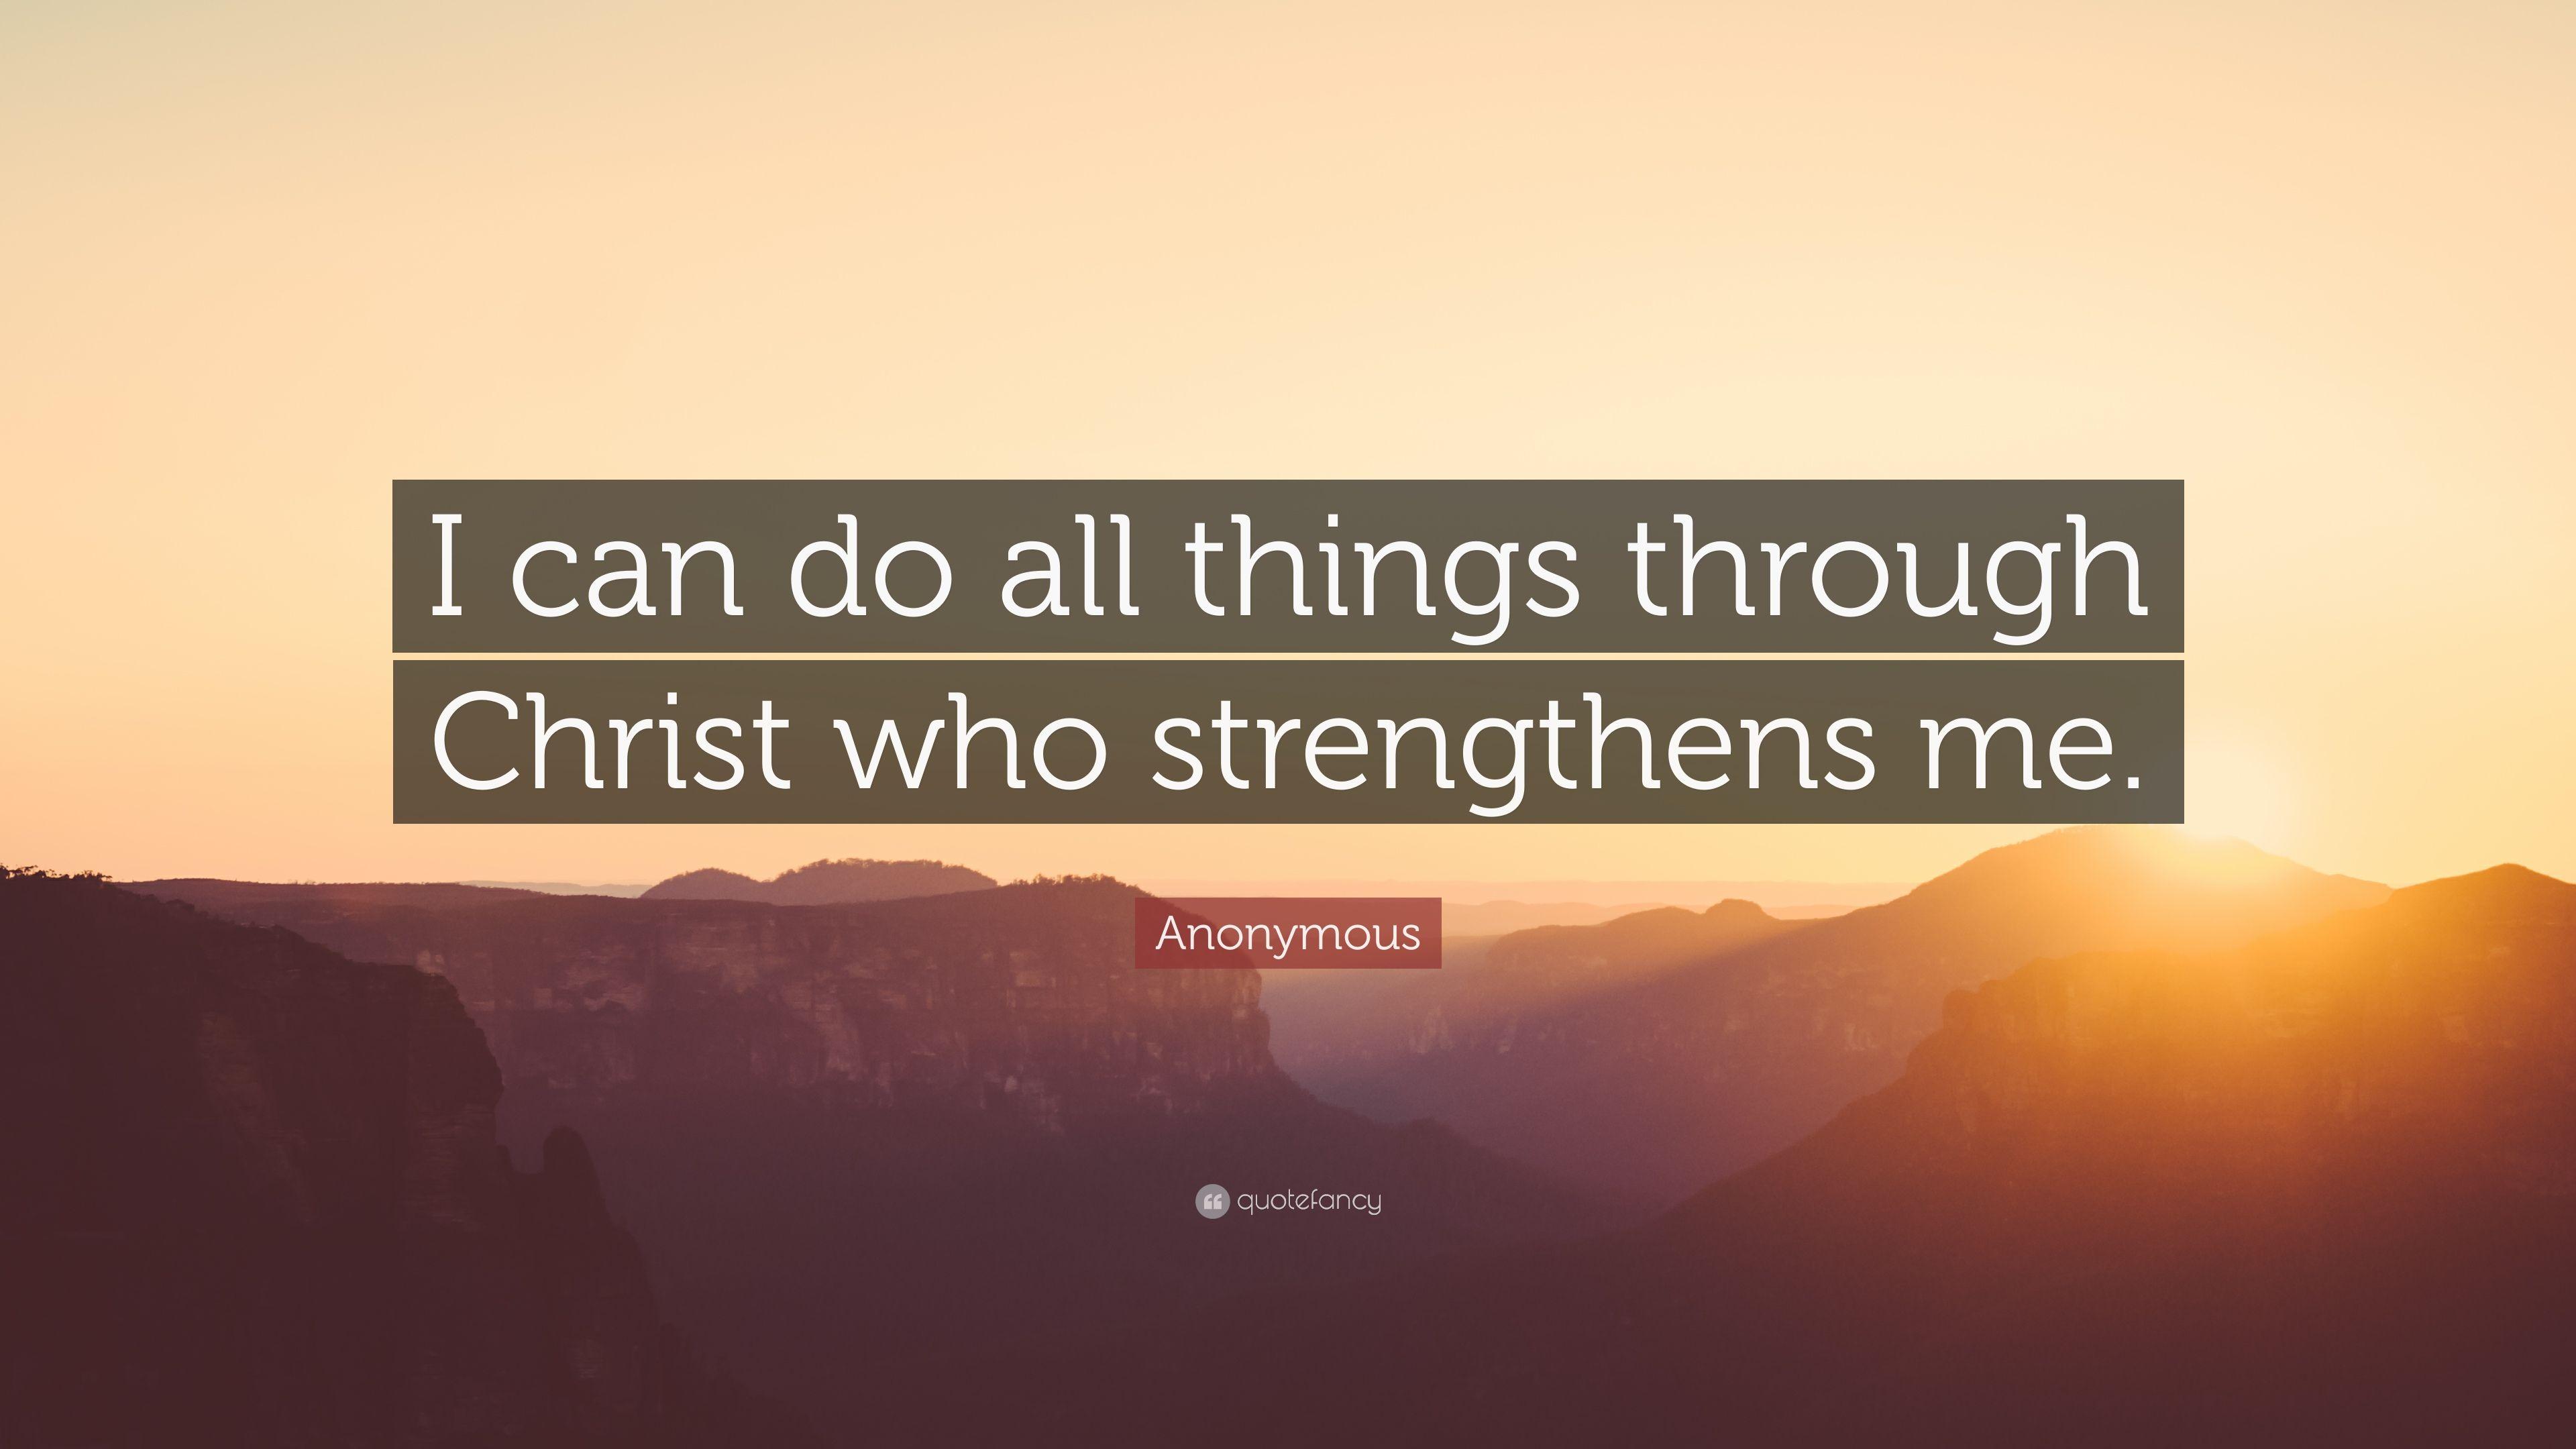 Anonymous Quote: “I can do all things through Christ who strengthens